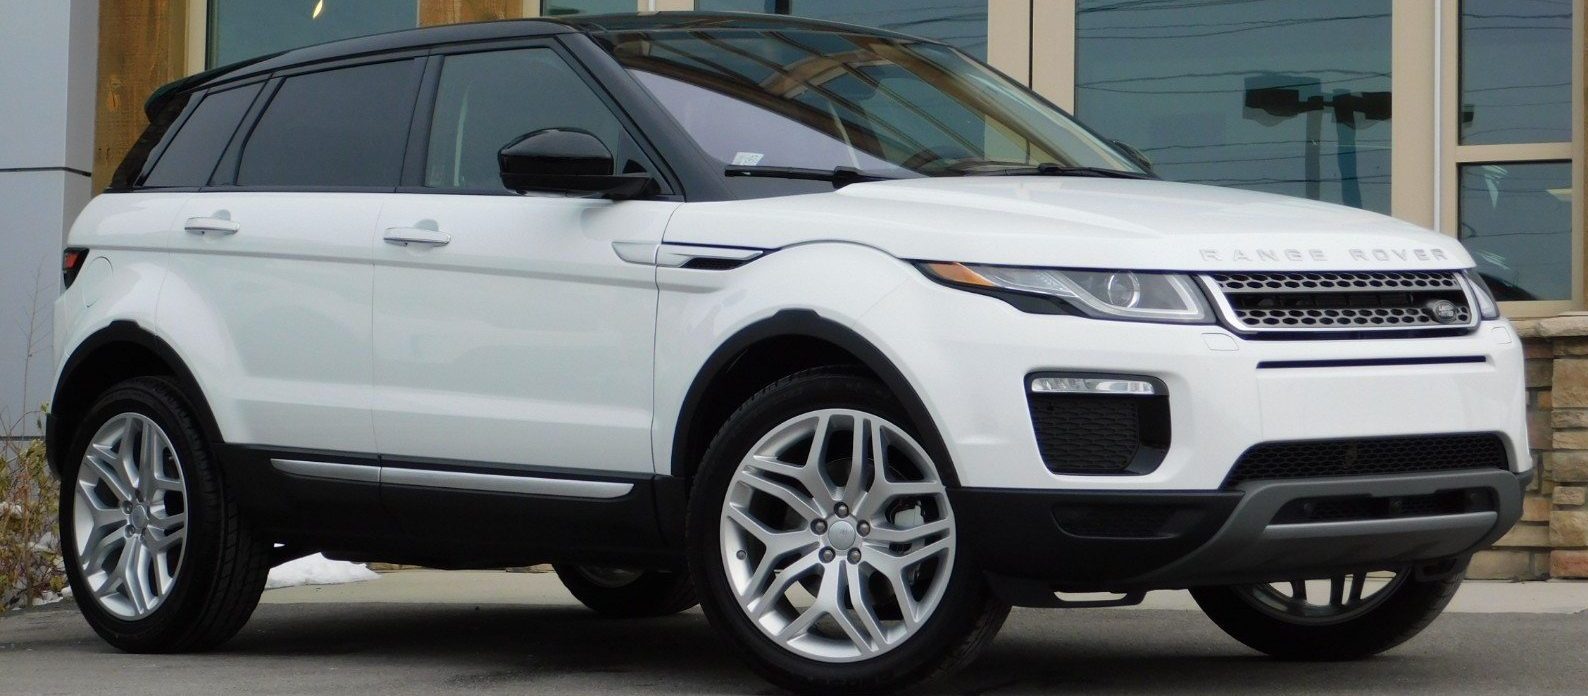 evoque MHED Electric Vehicle Sales up 204%